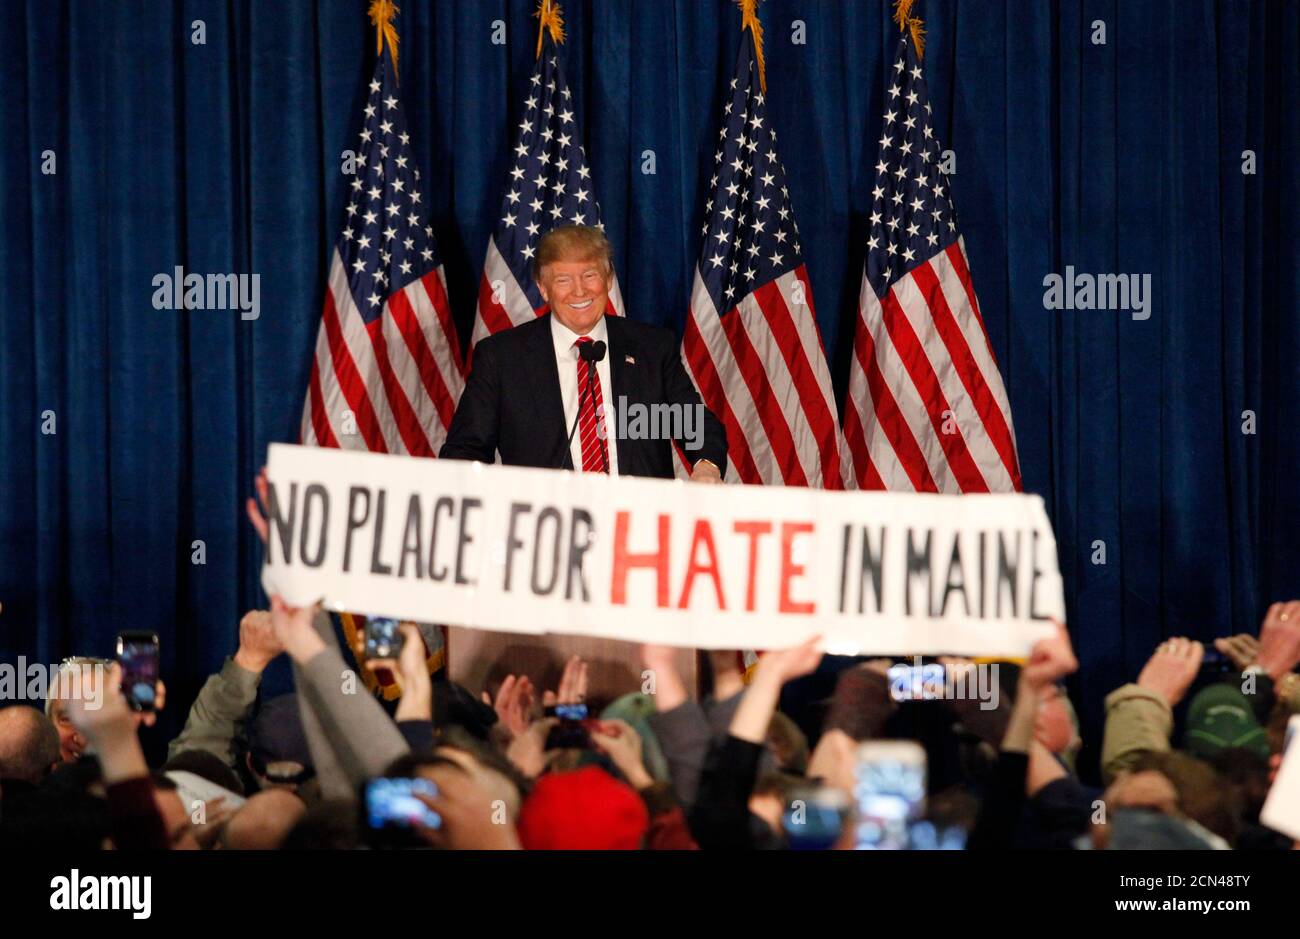 Republican U.S. presidential candidate Donald Trump smiles as protestors hold up a sign reading 'No Place for Hate in Maine' during a campaign rally in Portland, Maine March 3, 2016.  REUTERS/Joel Page Stock Photo